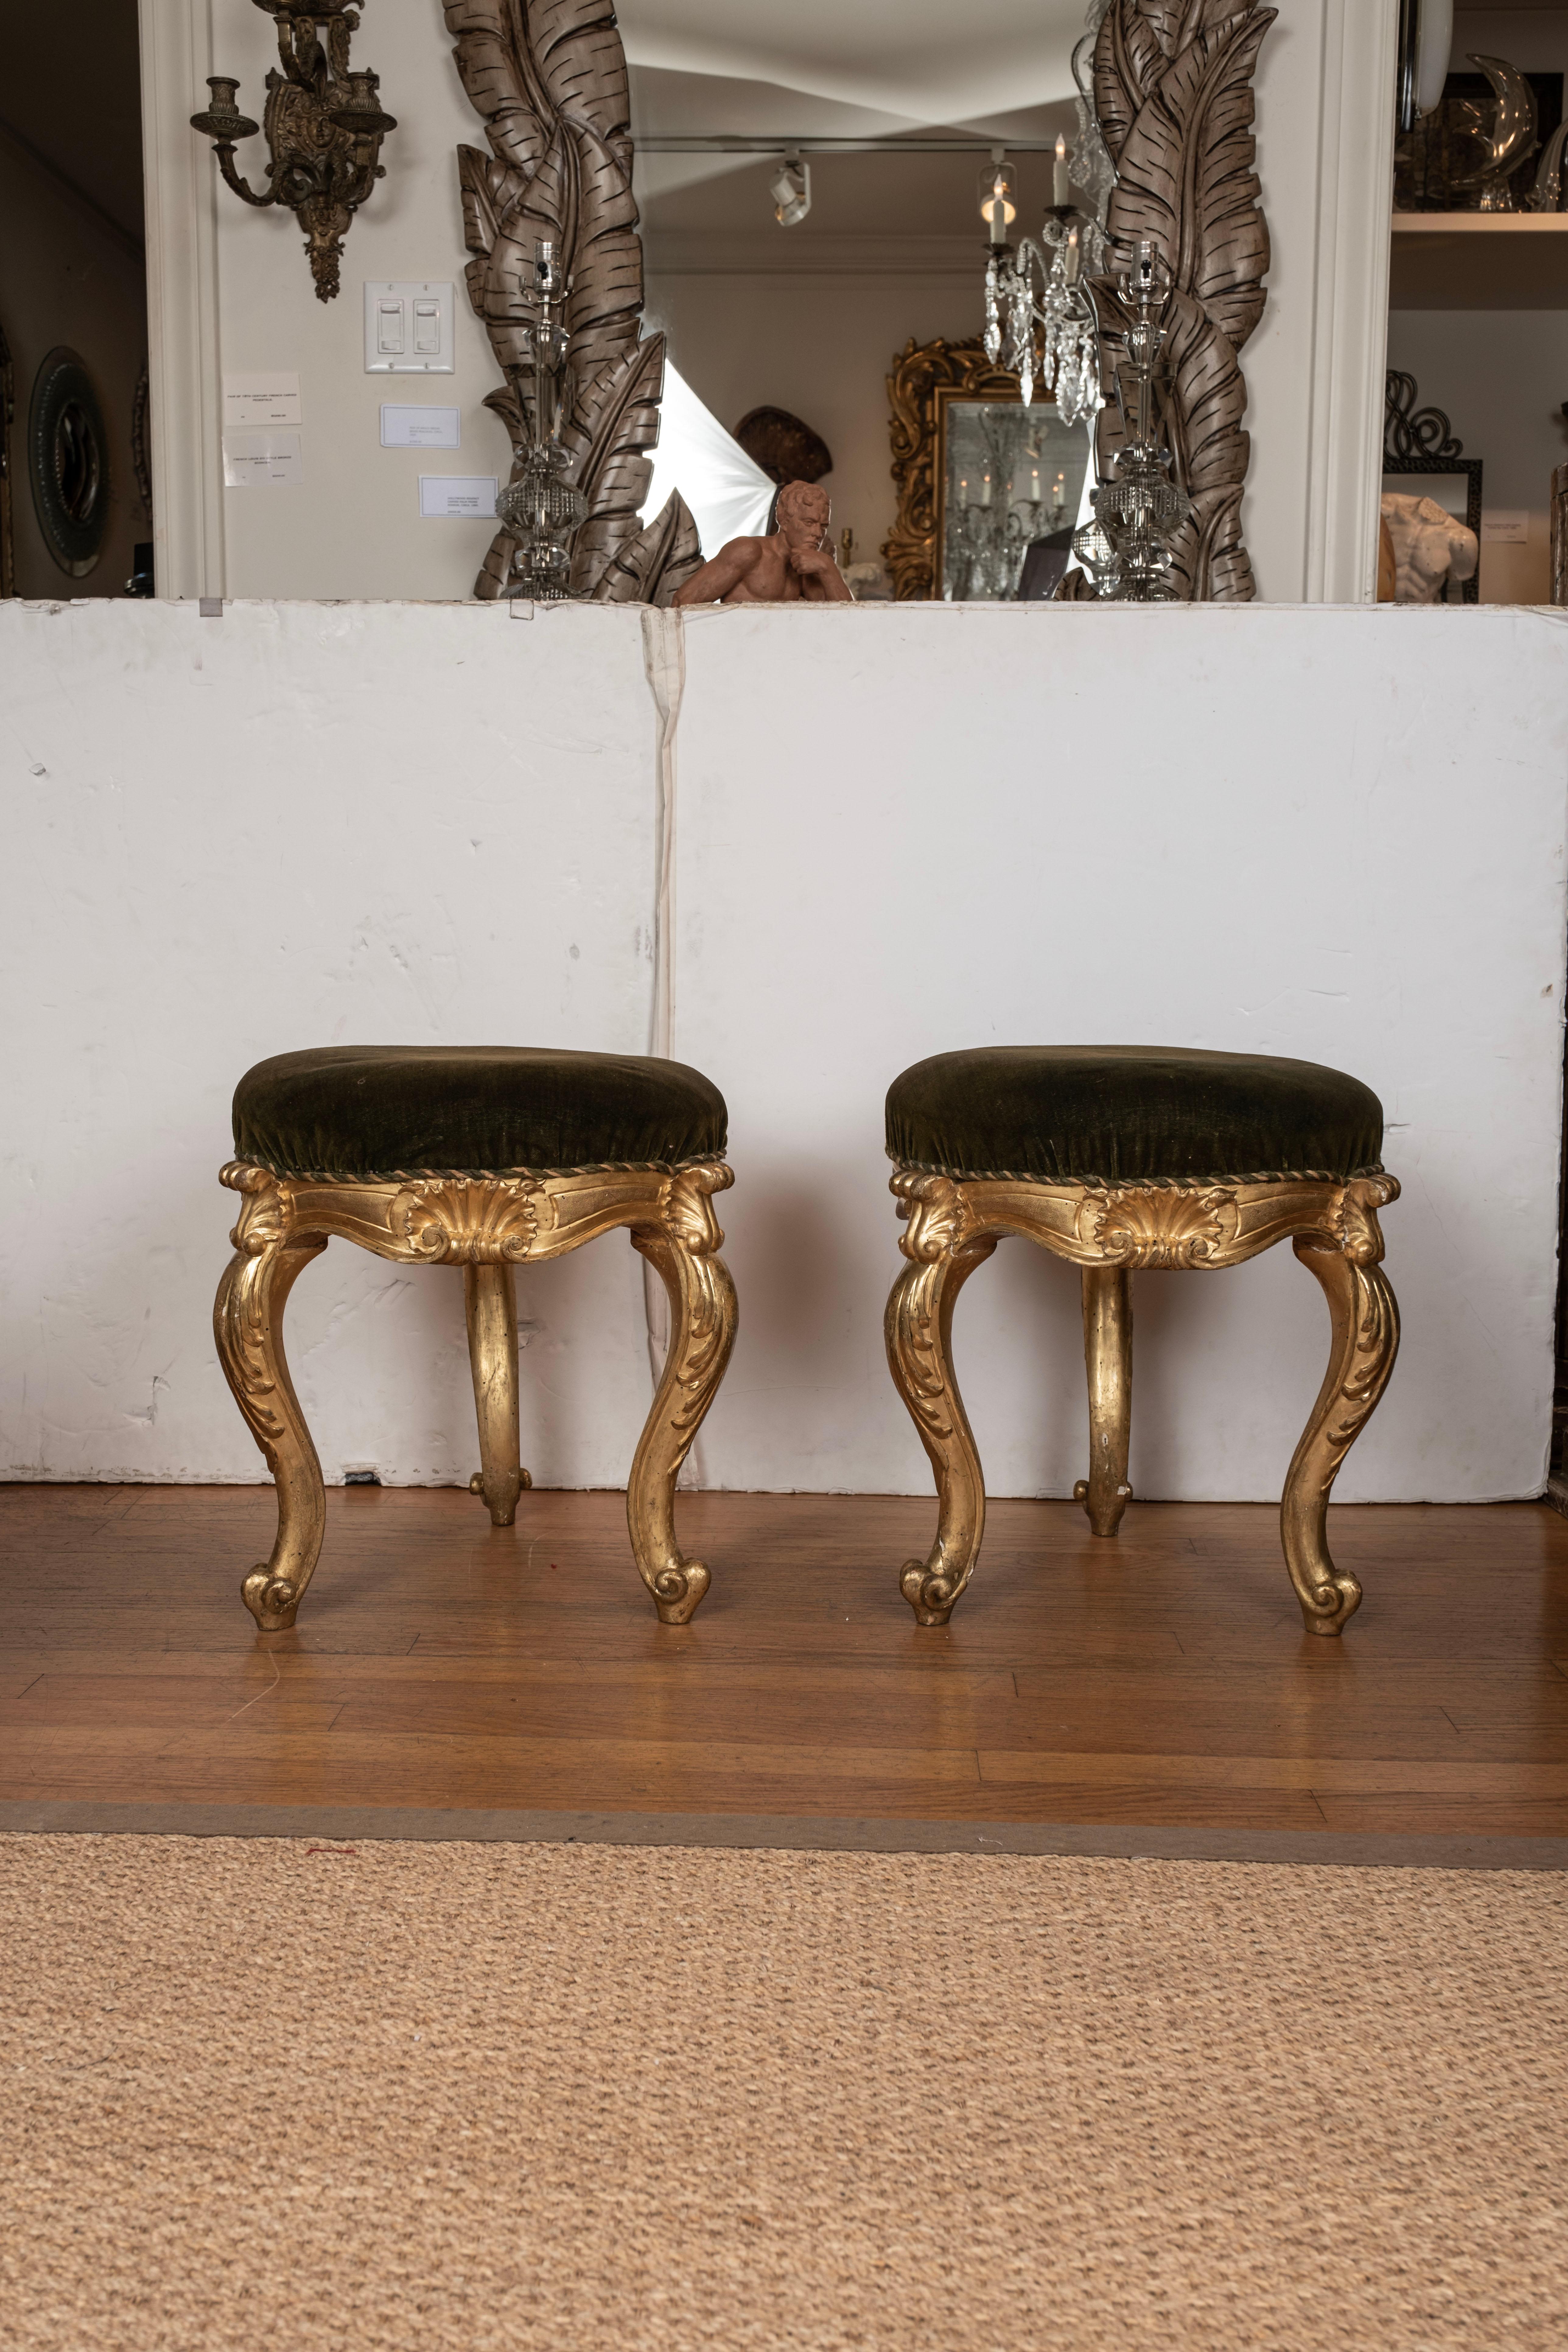 Pair of 19th century Italian Regence style giltwood benches.
These unusual three legged round Italian gilt wood benches, ottomans, poufs, or stools have graceful lines and are a versatile pair ready for the fabric of your choice.
Beautiful patina!